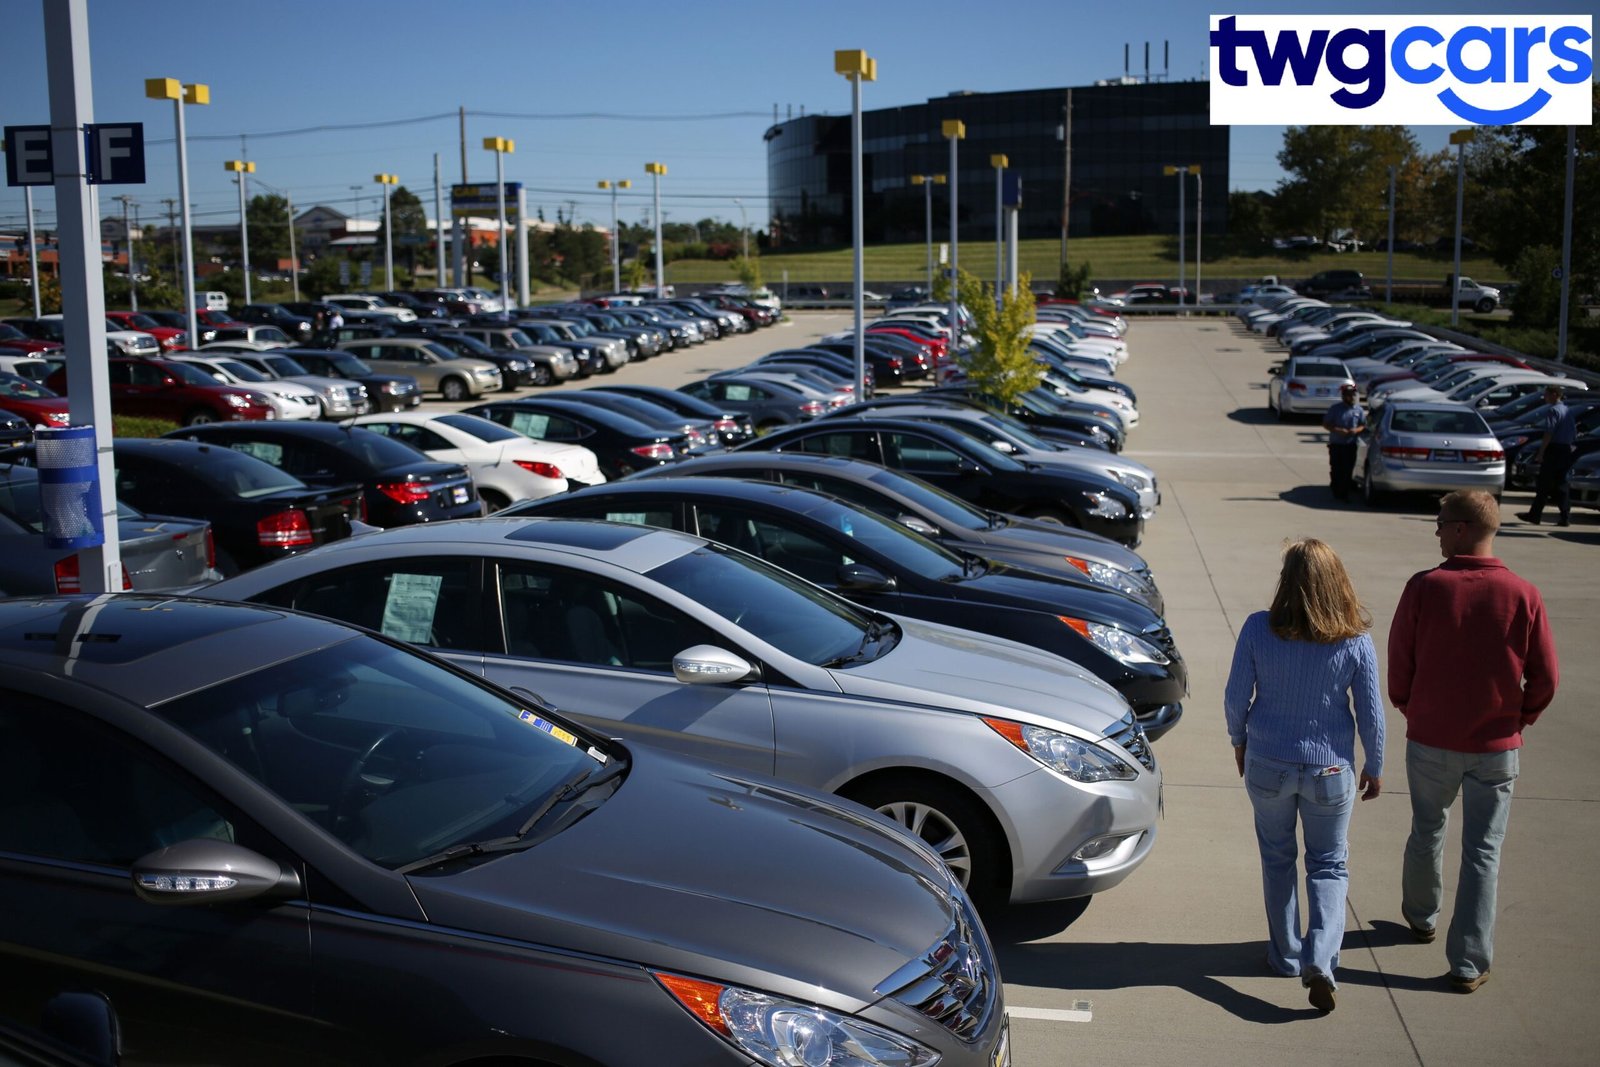 5 Reasons Why You Should Consider Hiring Used Car Dealers’ Services